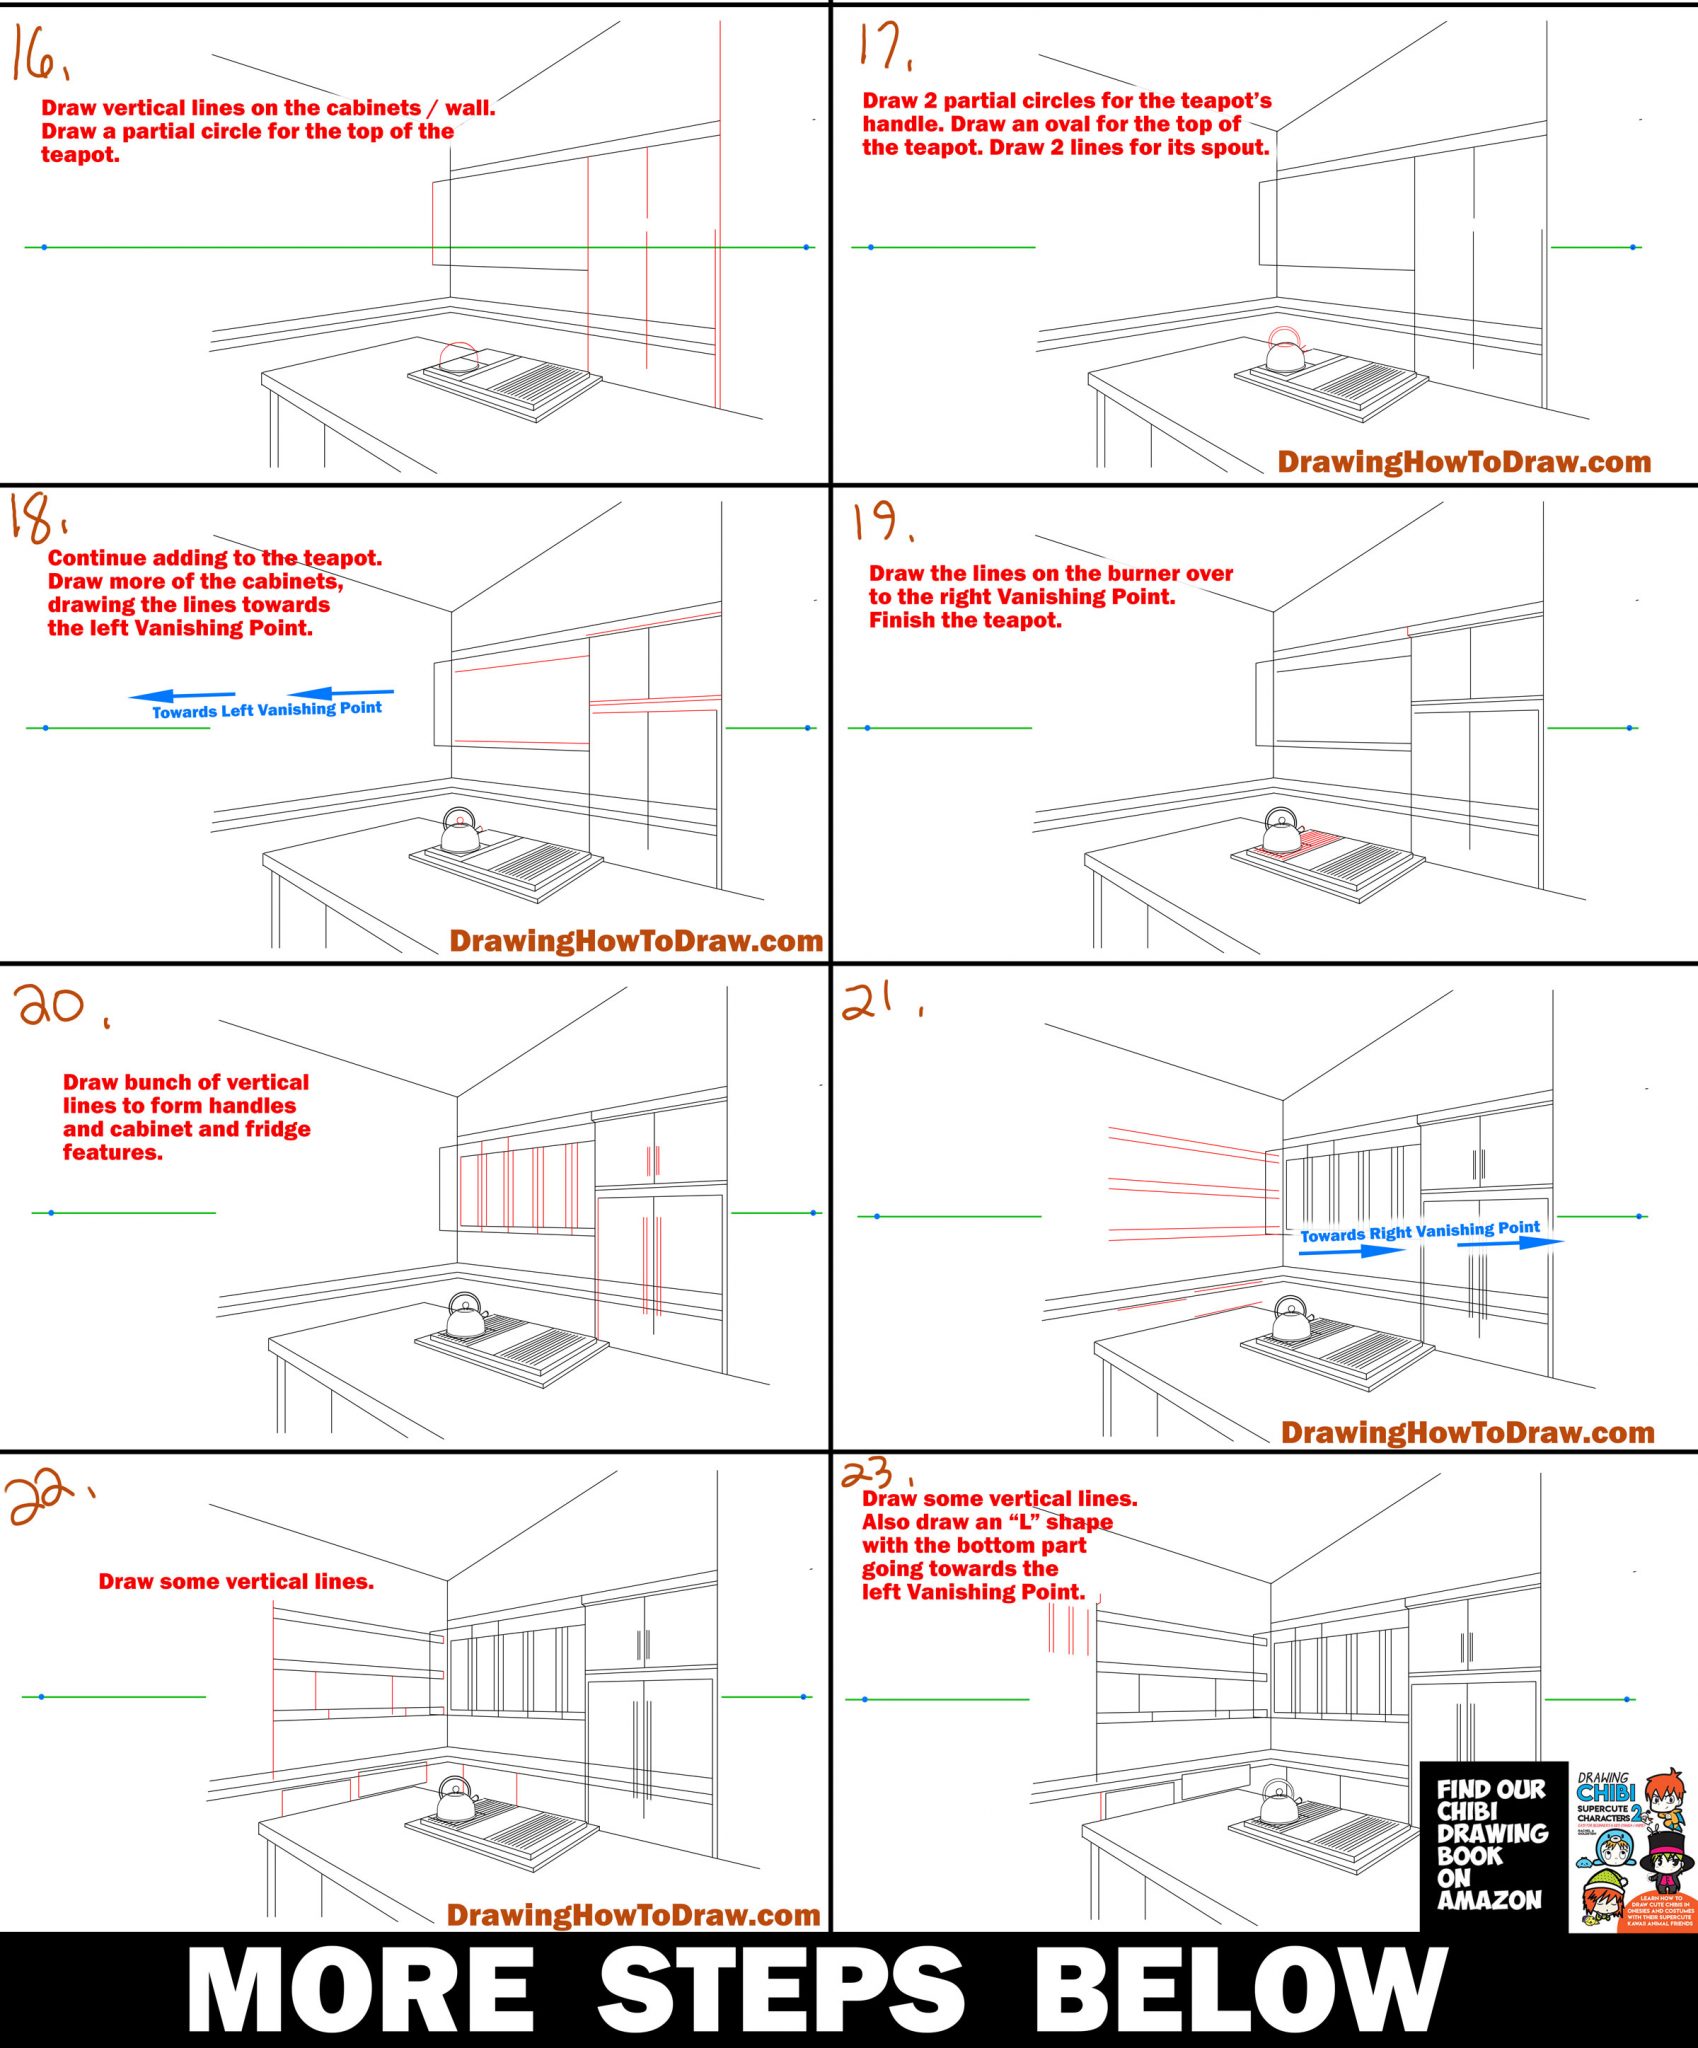 Albums 98+ Images how to draw a kitchen step by step Full HD, 2k, 4k